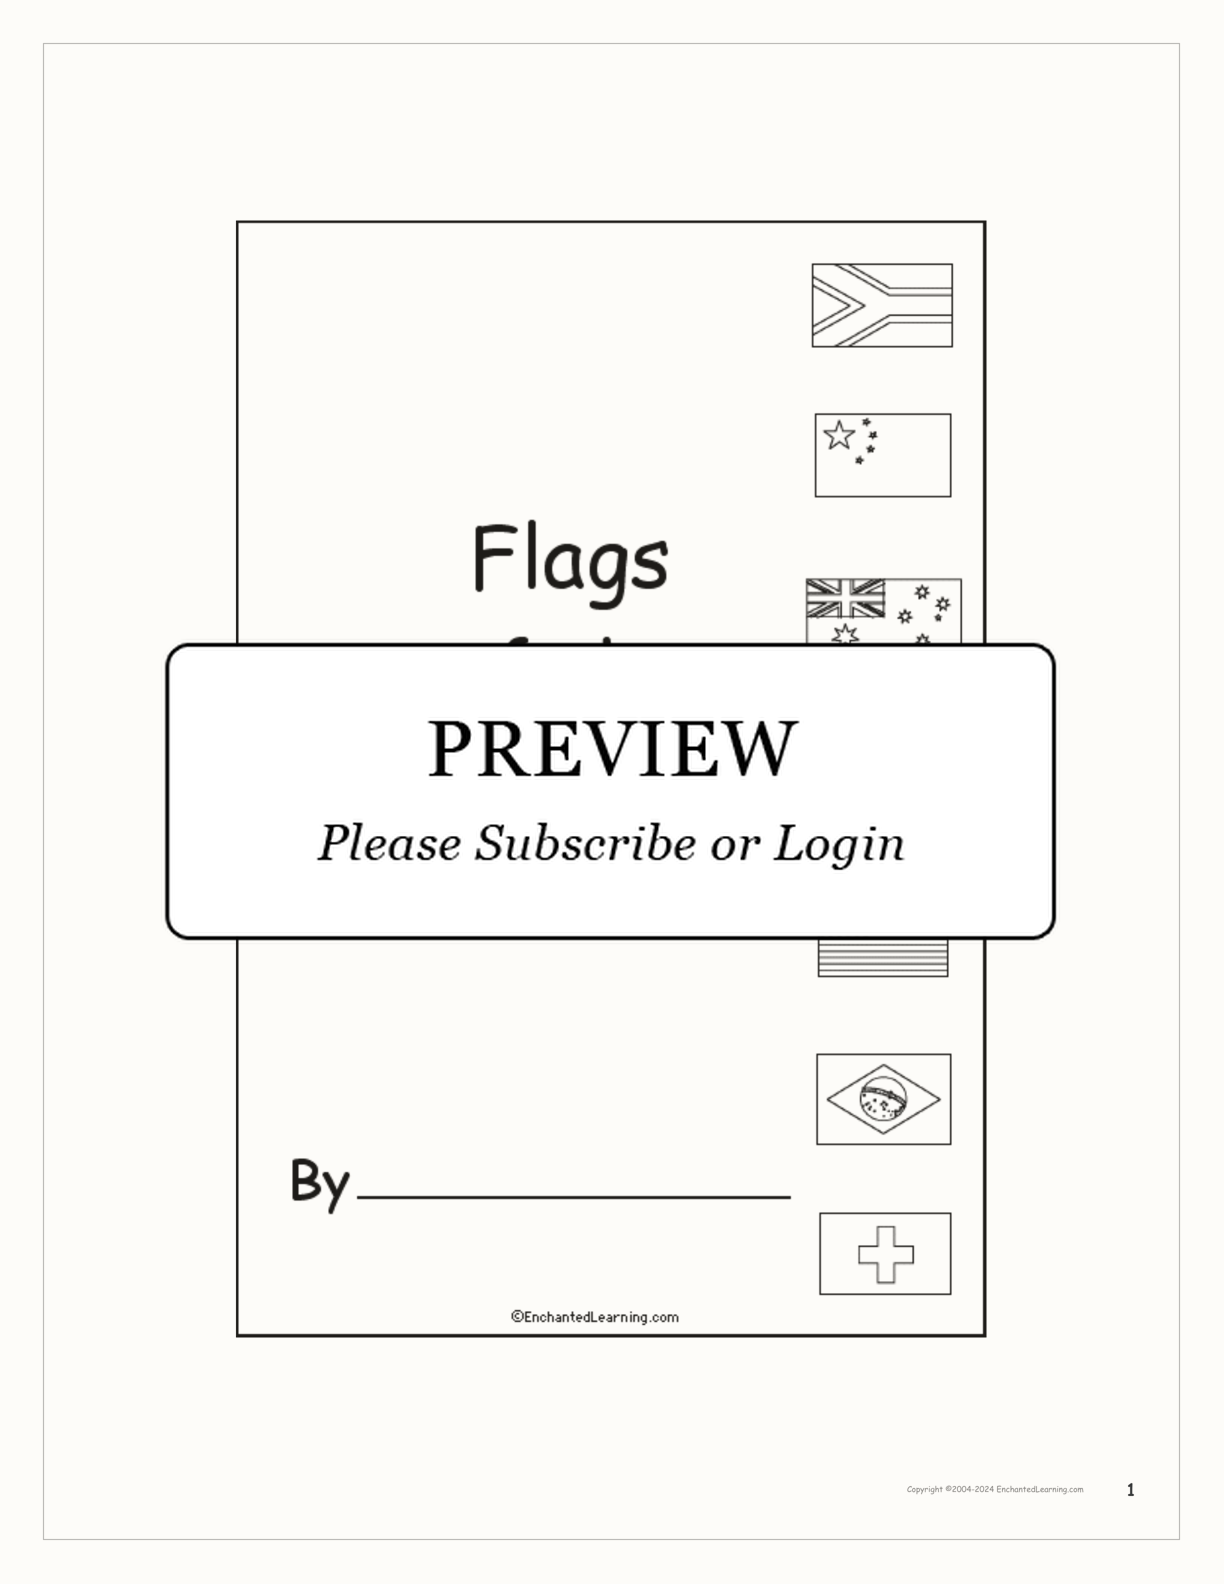 World Flags Book interactive printout page 1